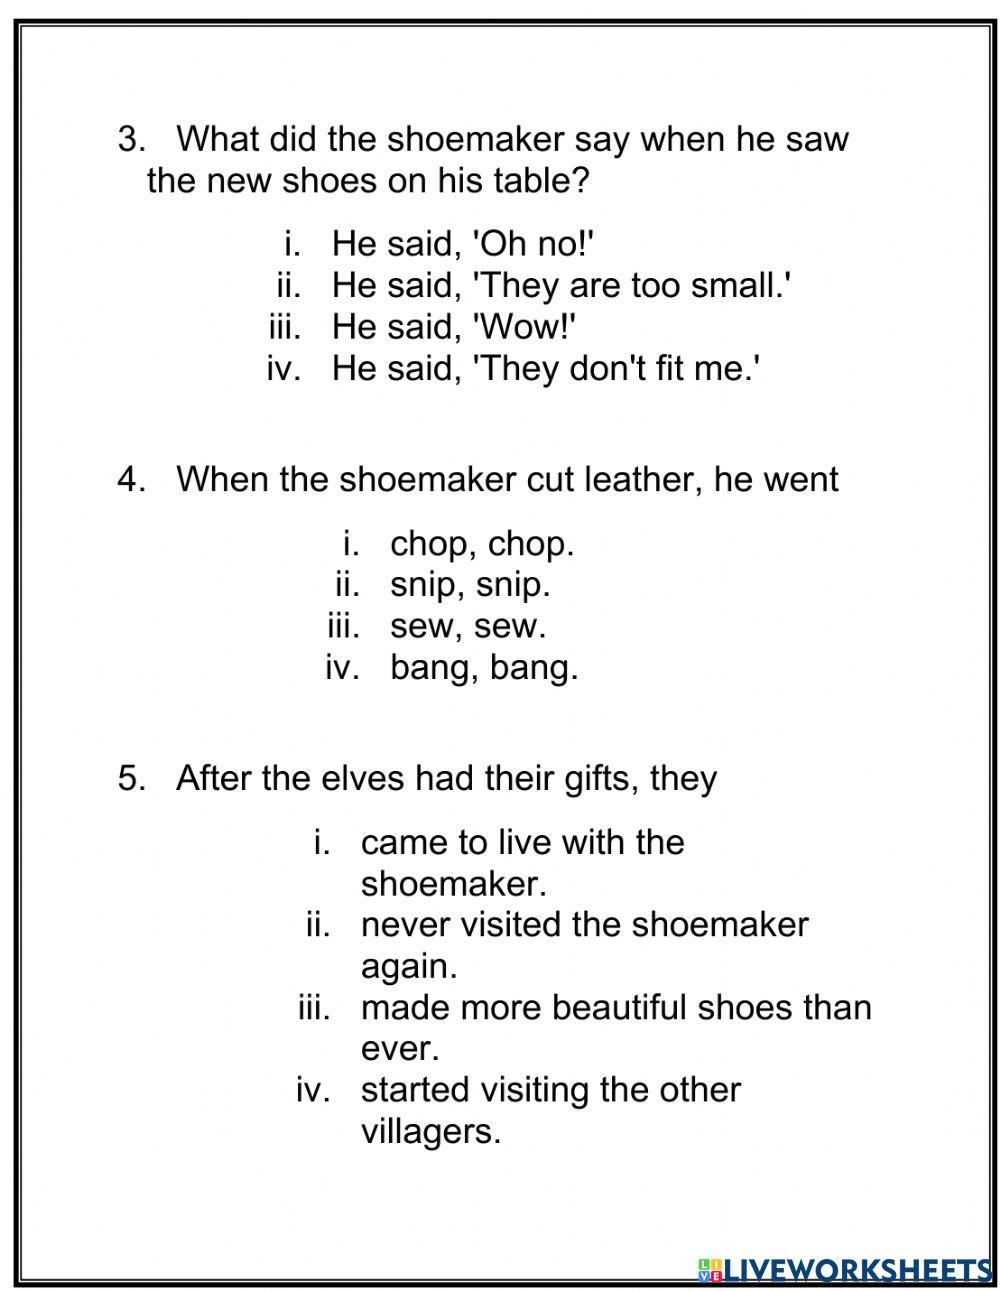 Elves and the shoemaker-comp